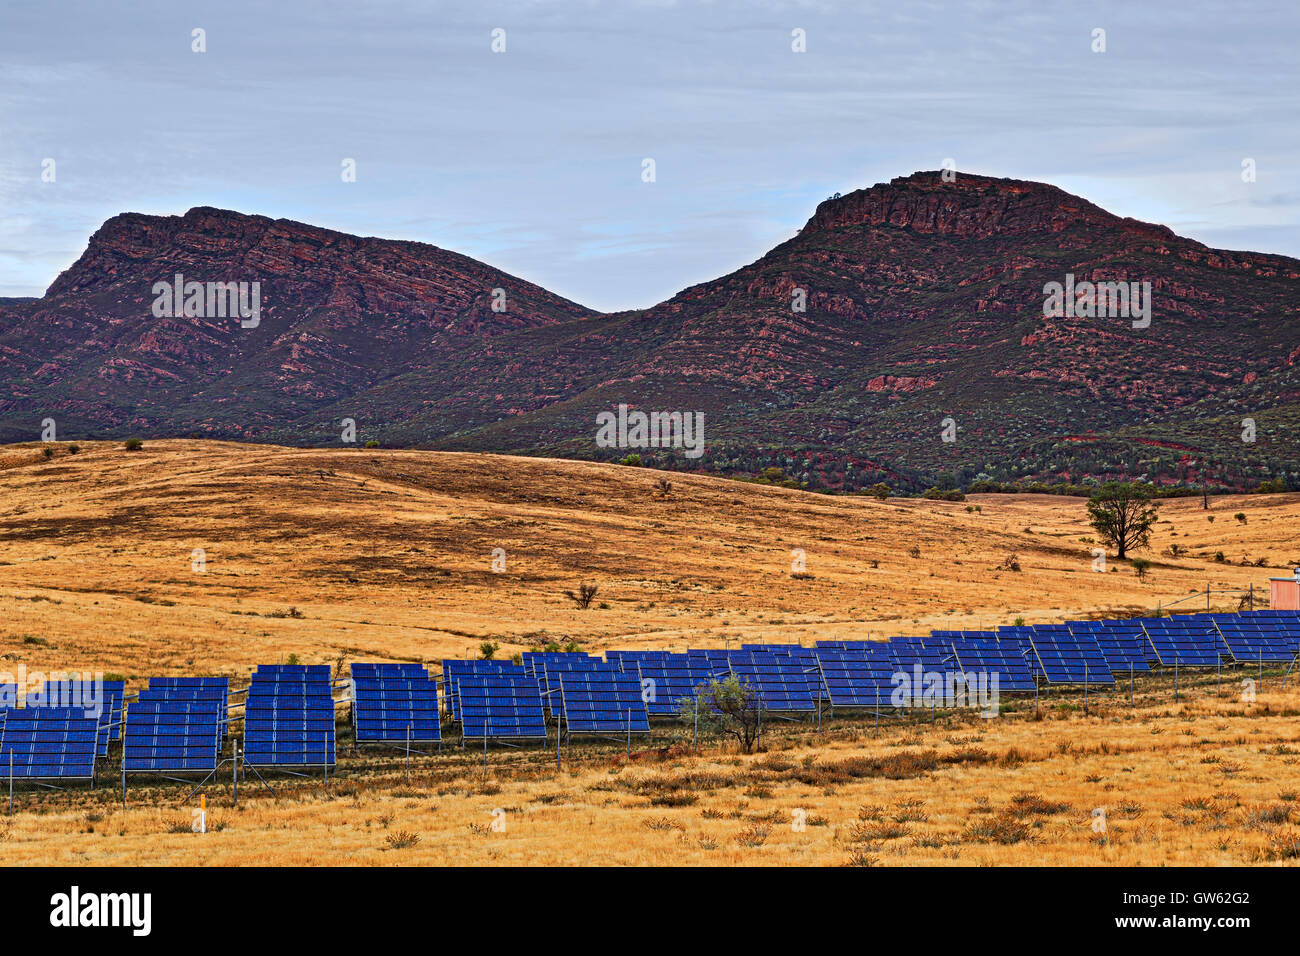 Flinders ranges national park autonomous power generation and supply from solar panel farm in a middle of outback plain against Stock Photo